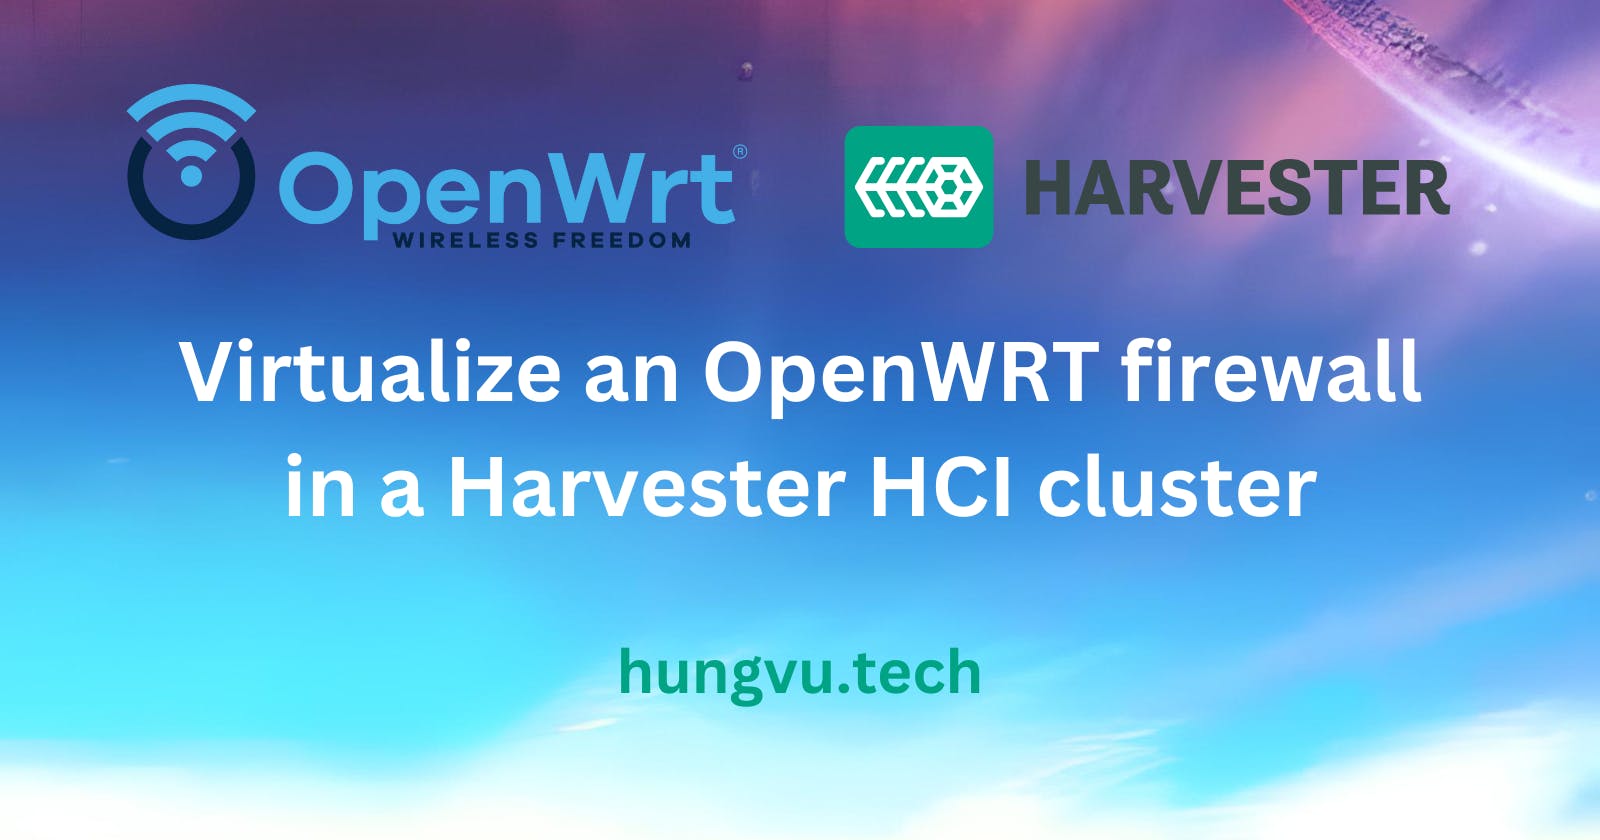 Deploy a virtualized OpenWRT firewall in Harvester, how did it go?